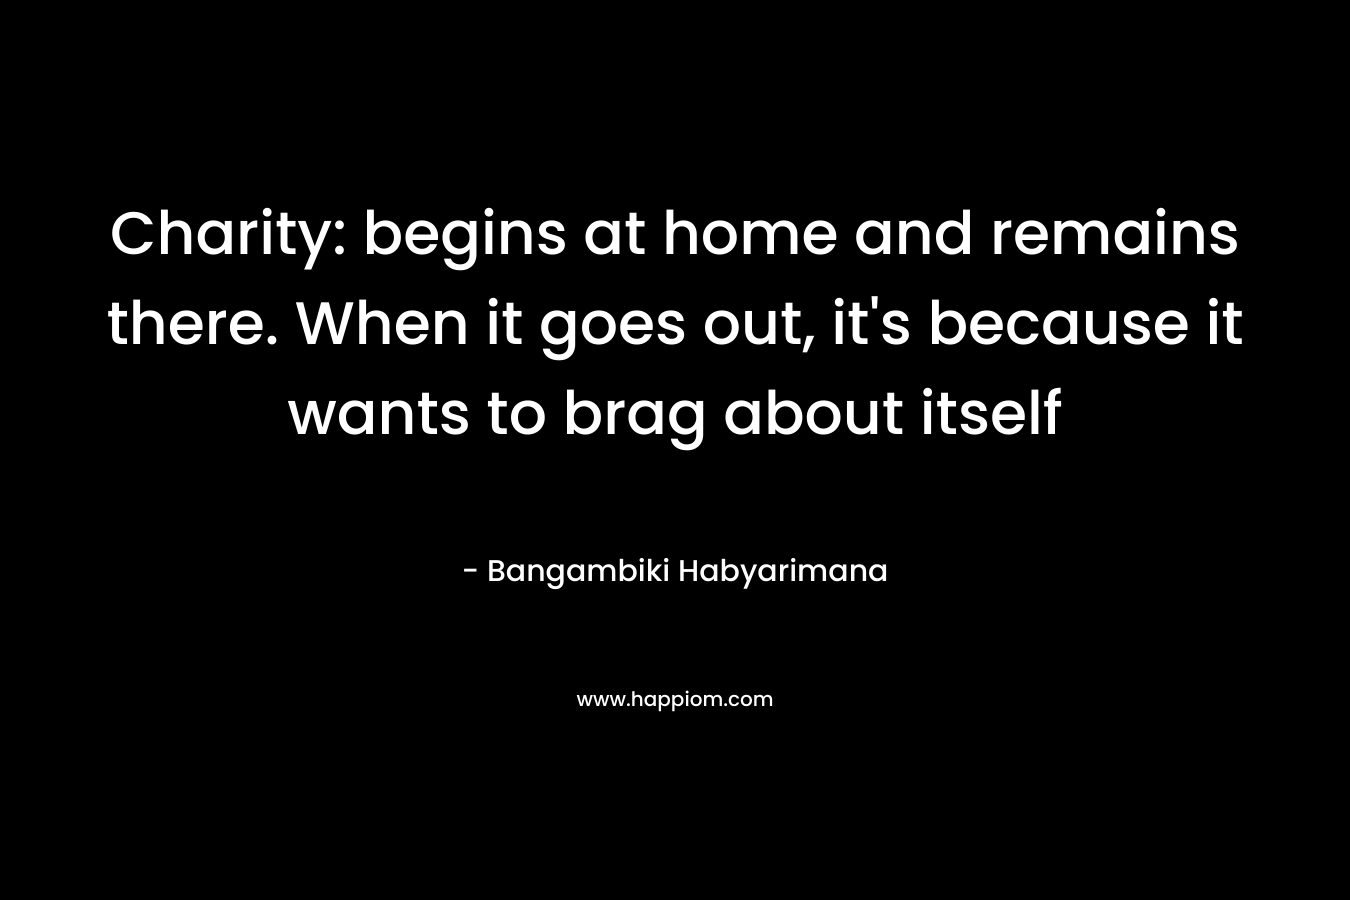 Charity: begins at home and remains there. When it goes out, it's because it wants to brag about itself